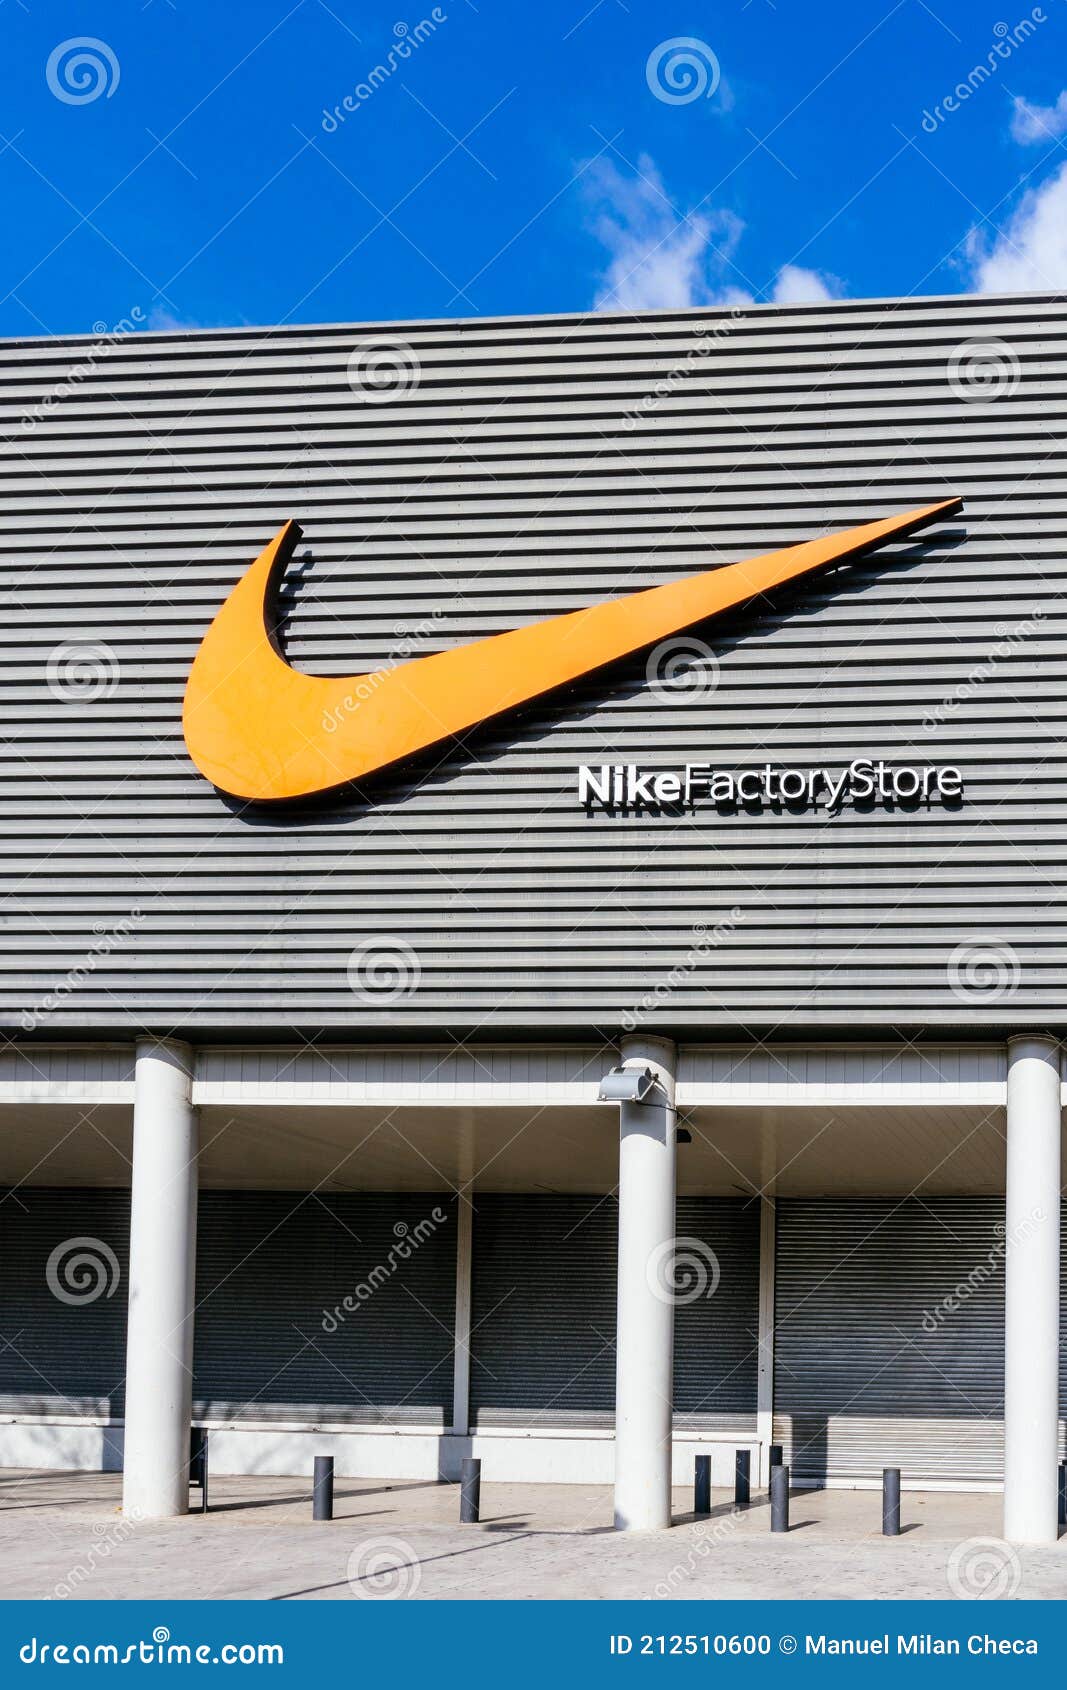 Badalona, Barcelona, Spain February 28, 2021. on the Facade of Nike, an American Multinational Company To the Editorial Image - of icon, emblem: 212510600